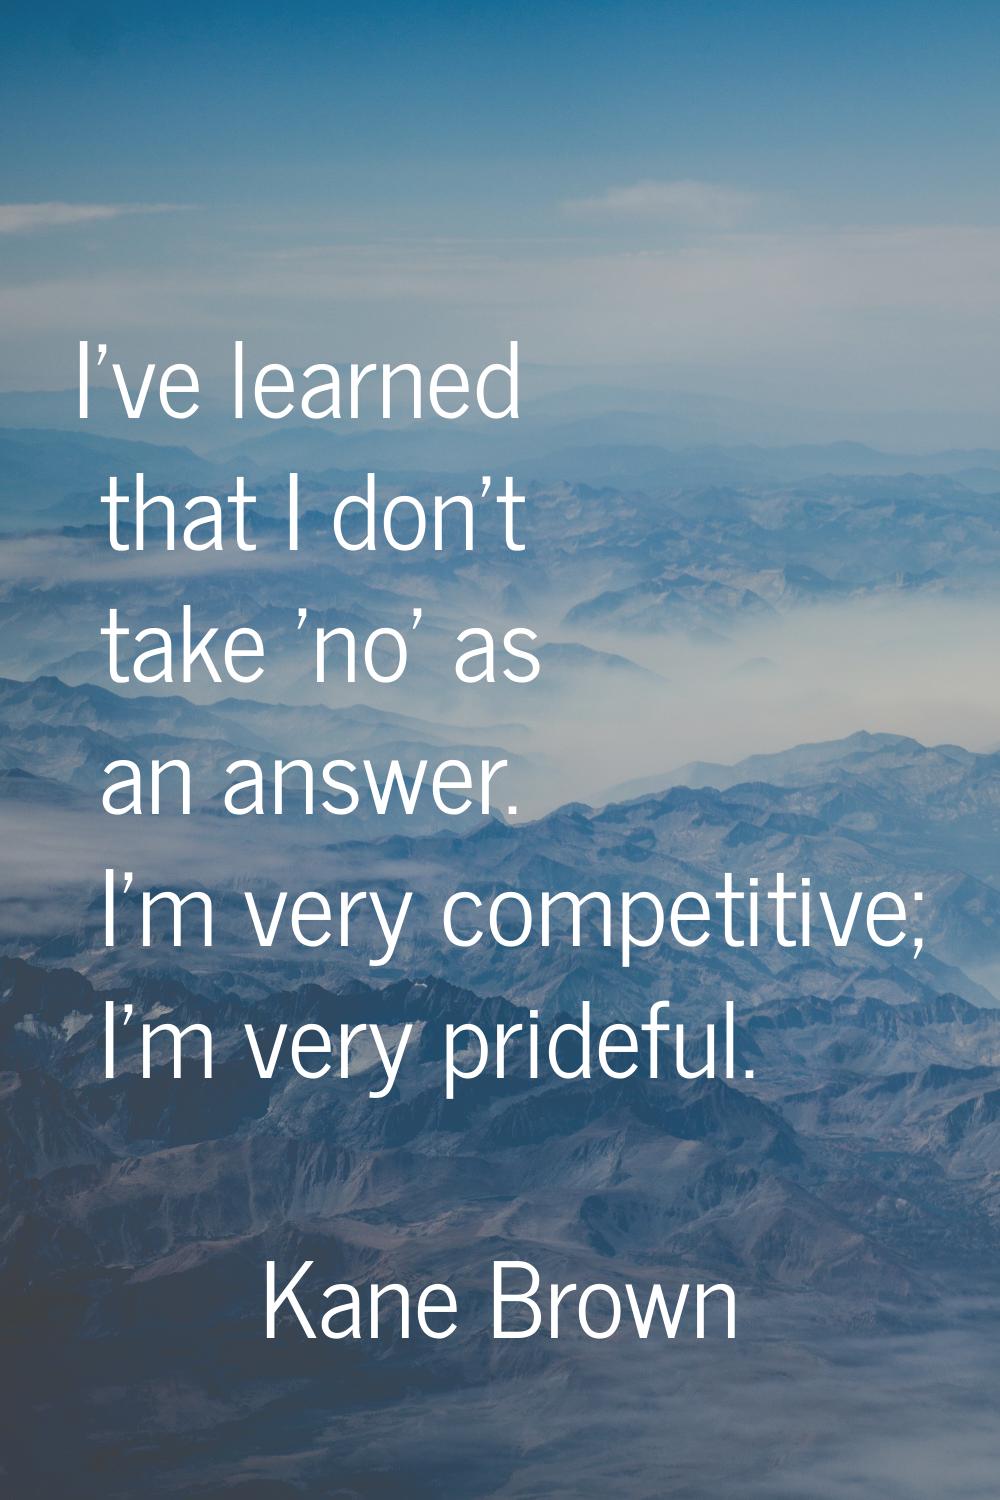 I've learned that I don't take 'no' as an answer. I'm very competitive; I'm very prideful.